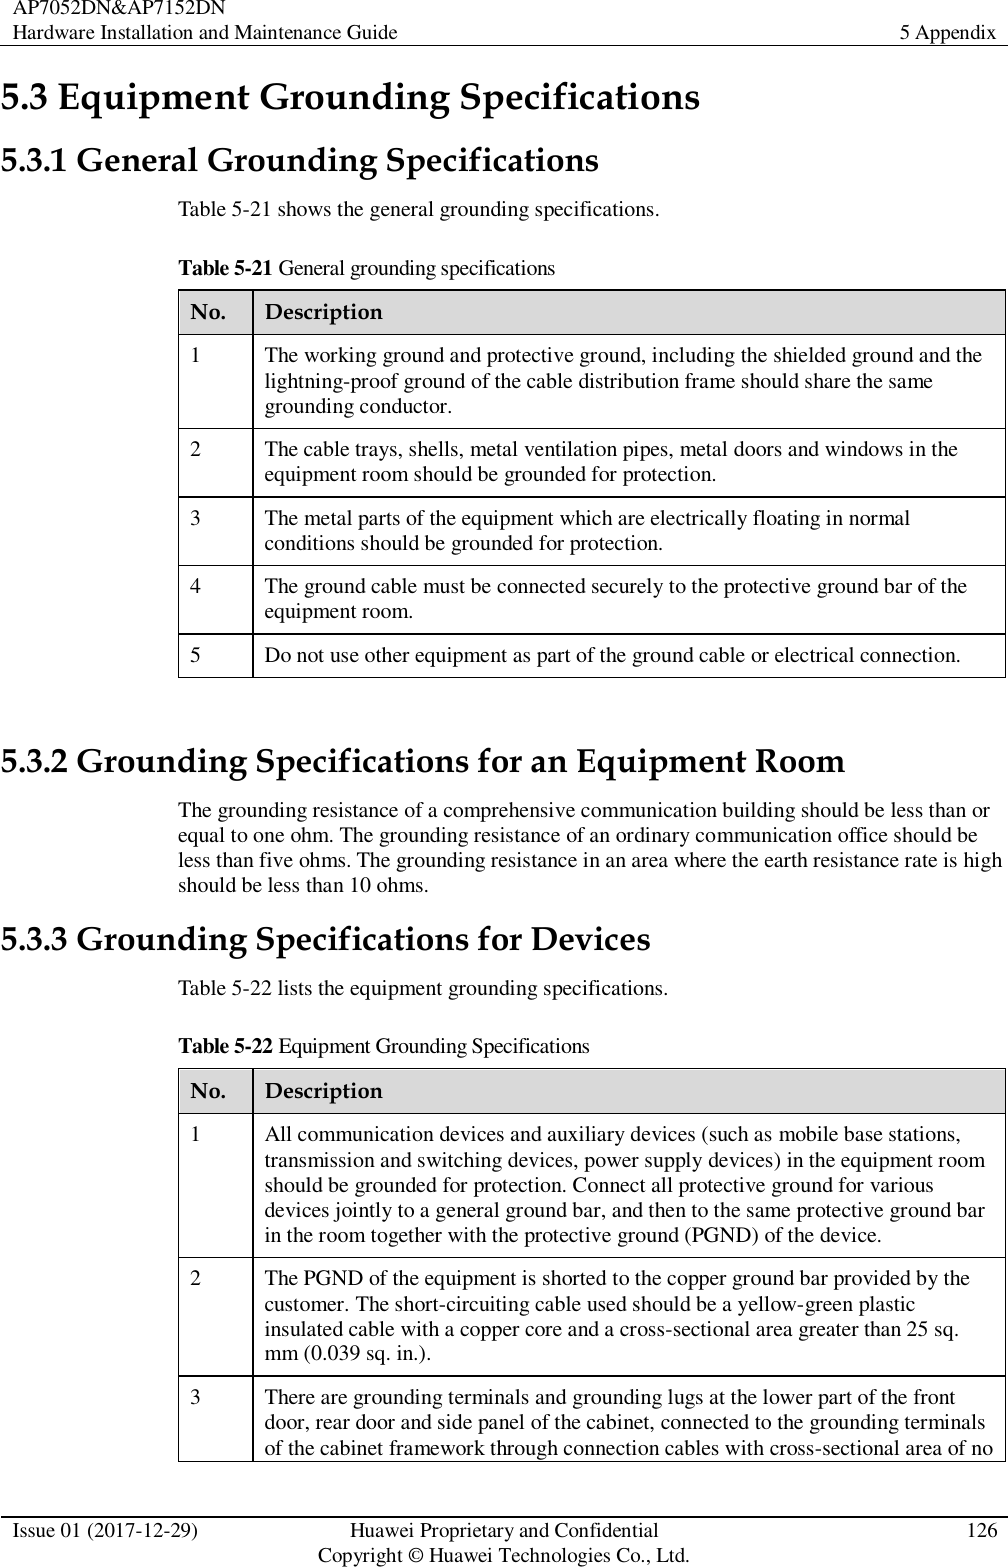 AP7052DN&amp;AP7152DN Hardware Installation and Maintenance Guide 5 Appendix  Issue 01 (2017-12-29) Huawei Proprietary and Confidential                                     Copyright © Huawei Technologies Co., Ltd. 126  5.3 Equipment Grounding Specifications 5.3.1 General Grounding Specifications Table 5-21 shows the general grounding specifications. Table 5-21 General grounding specifications No. Description 1 The working ground and protective ground, including the shielded ground and the lightning-proof ground of the cable distribution frame should share the same grounding conductor. 2 The cable trays, shells, metal ventilation pipes, metal doors and windows in the equipment room should be grounded for protection. 3 The metal parts of the equipment which are electrically floating in normal conditions should be grounded for protection. 4 The ground cable must be connected securely to the protective ground bar of the equipment room. 5 Do not use other equipment as part of the ground cable or electrical connection.  5.3.2 Grounding Specifications for an Equipment Room The grounding resistance of a comprehensive communication building should be less than or equal to one ohm. The grounding resistance of an ordinary communication office should be less than five ohms. The grounding resistance in an area where the earth resistance rate is high should be less than 10 ohms. 5.3.3 Grounding Specifications for Devices Table 5-22 lists the equipment grounding specifications. Table 5-22 Equipment Grounding Specifications No. Description 1 All communication devices and auxiliary devices (such as mobile base stations, transmission and switching devices, power supply devices) in the equipment room should be grounded for protection. Connect all protective ground for various devices jointly to a general ground bar, and then to the same protective ground bar in the room together with the protective ground (PGND) of the device. 2 The PGND of the equipment is shorted to the copper ground bar provided by the customer. The short-circuiting cable used should be a yellow-green plastic insulated cable with a copper core and a cross-sectional area greater than 25 sq. mm (0.039 sq. in.). 3 There are grounding terminals and grounding lugs at the lower part of the front door, rear door and side panel of the cabinet, connected to the grounding terminals of the cabinet framework through connection cables with cross-sectional area of no 